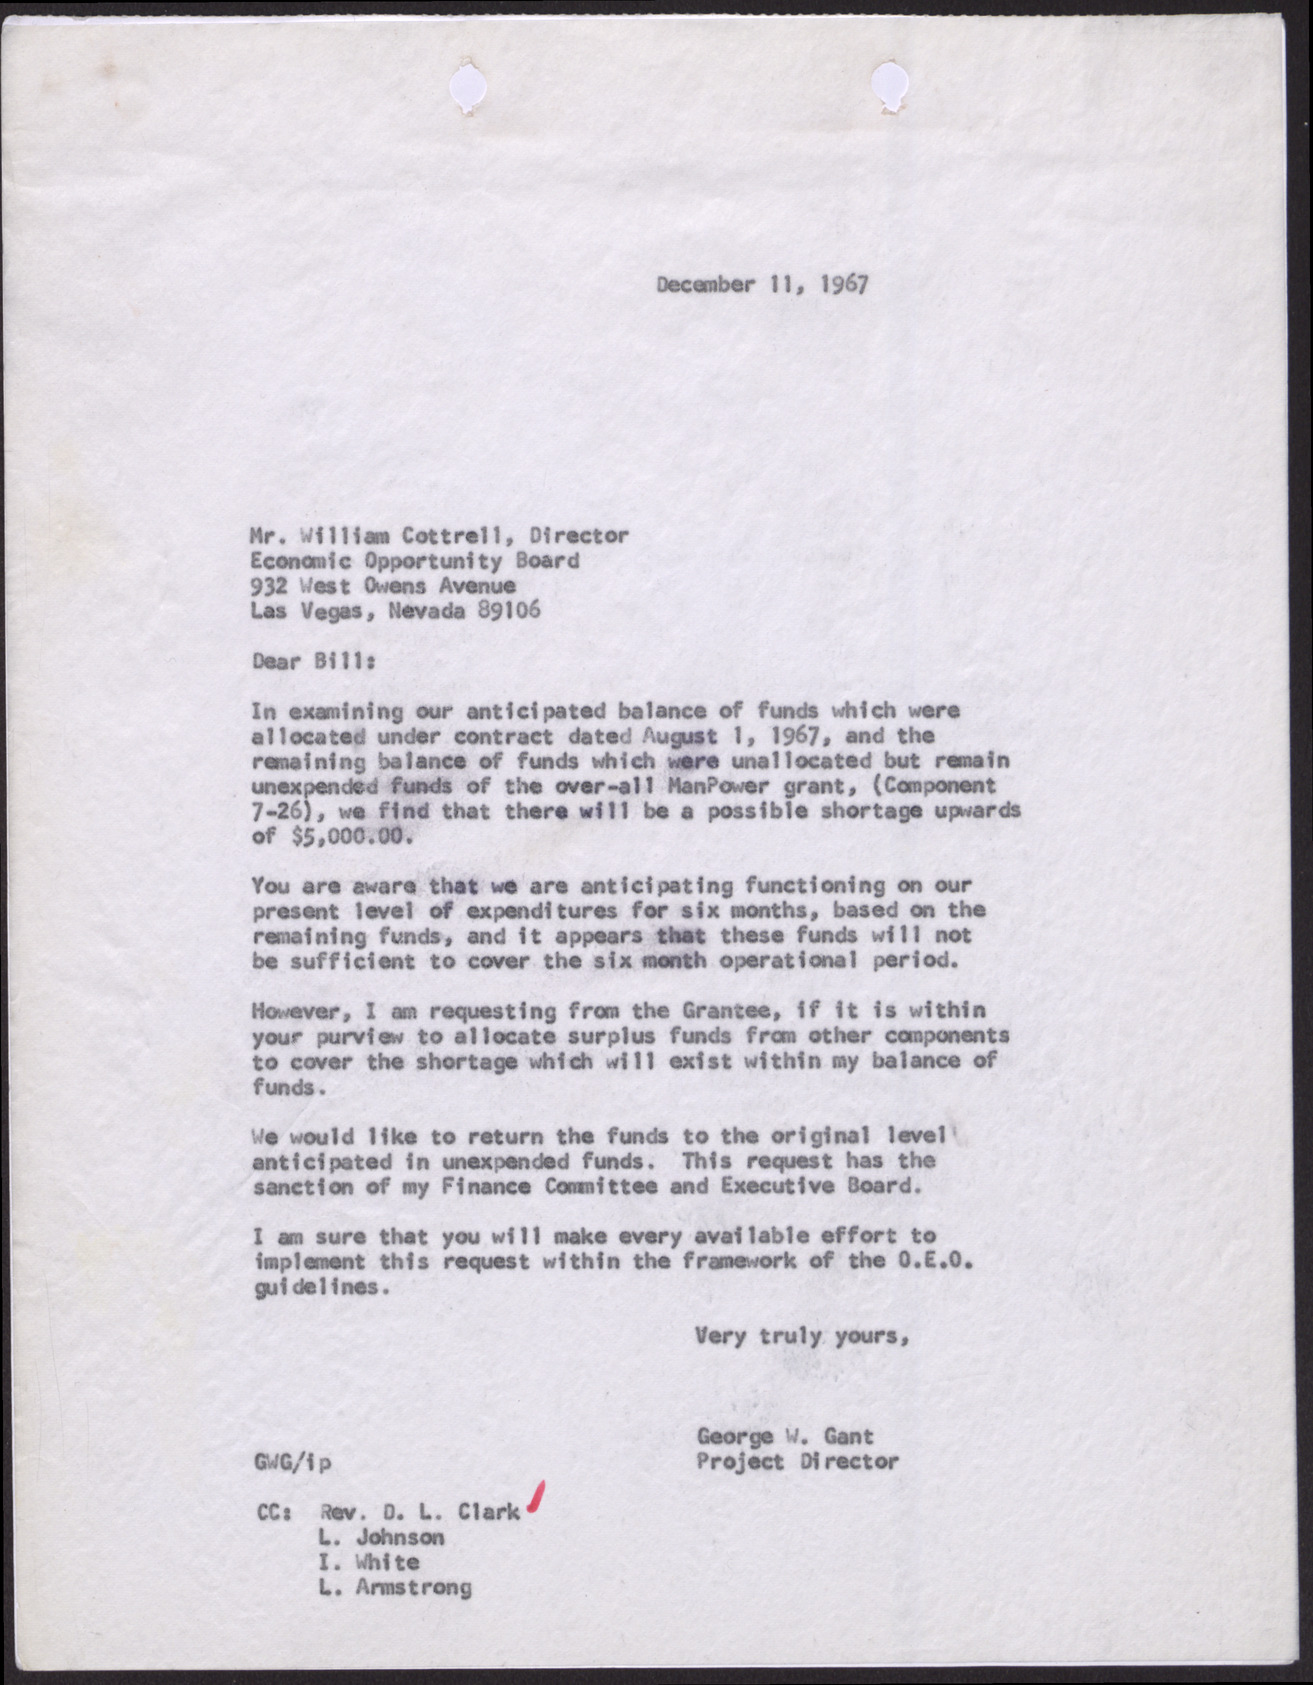 Letter to Mr. William Cottrell from George W. Gant, December 11, 1967